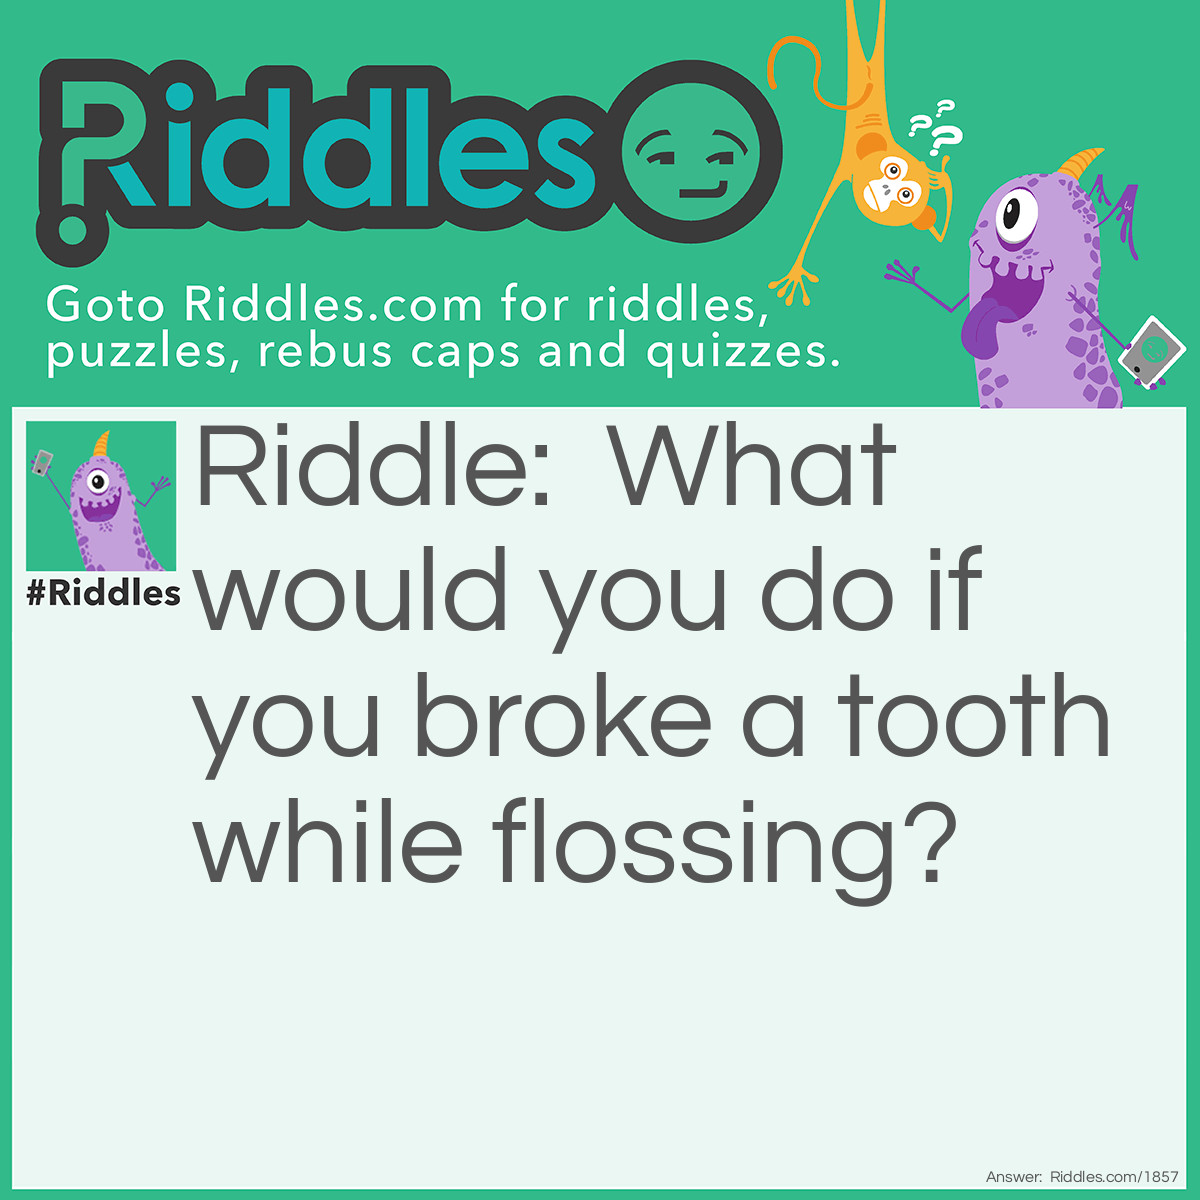 Riddle: What would you do if you broke a tooth while flossing? Answer: Use tooth paste.